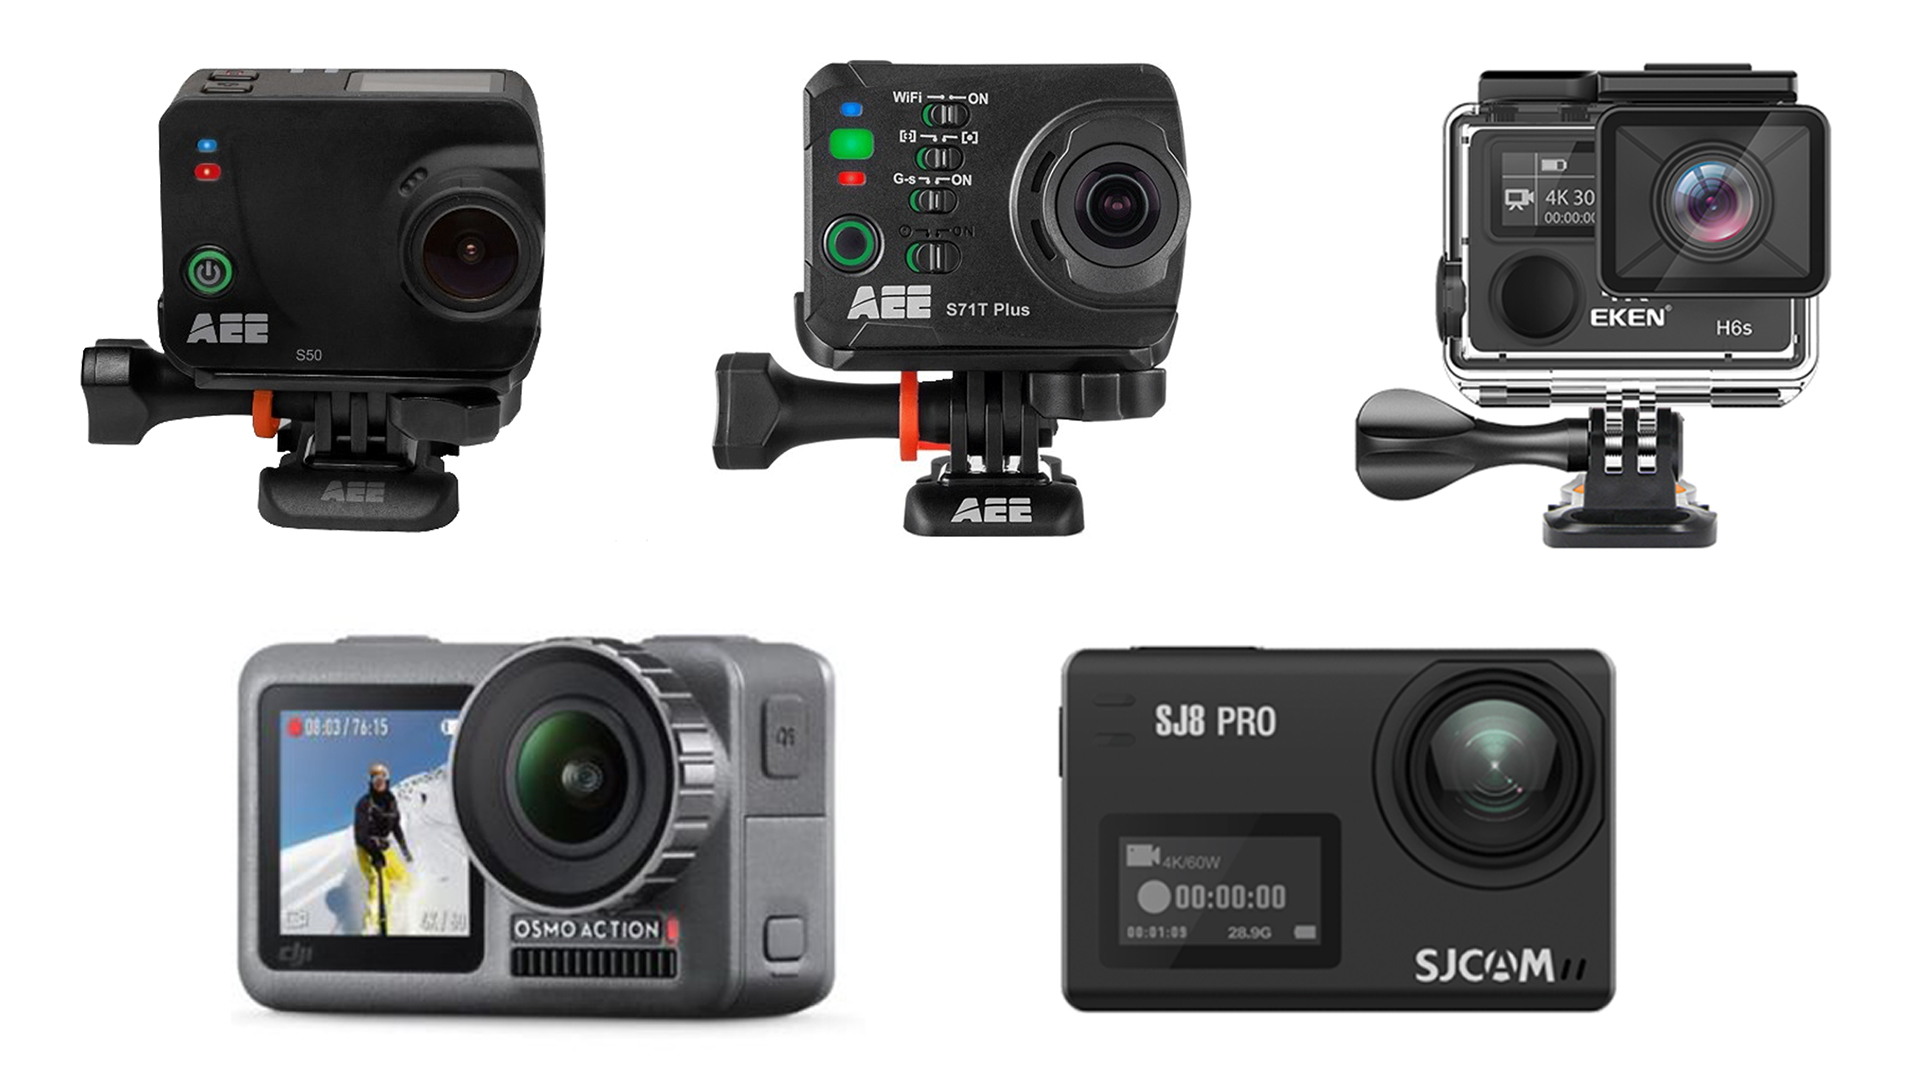 Price List 5 Budget Action Cameras Available In Nepal That Work As Gopro Alternatives Onlinekhabar English News